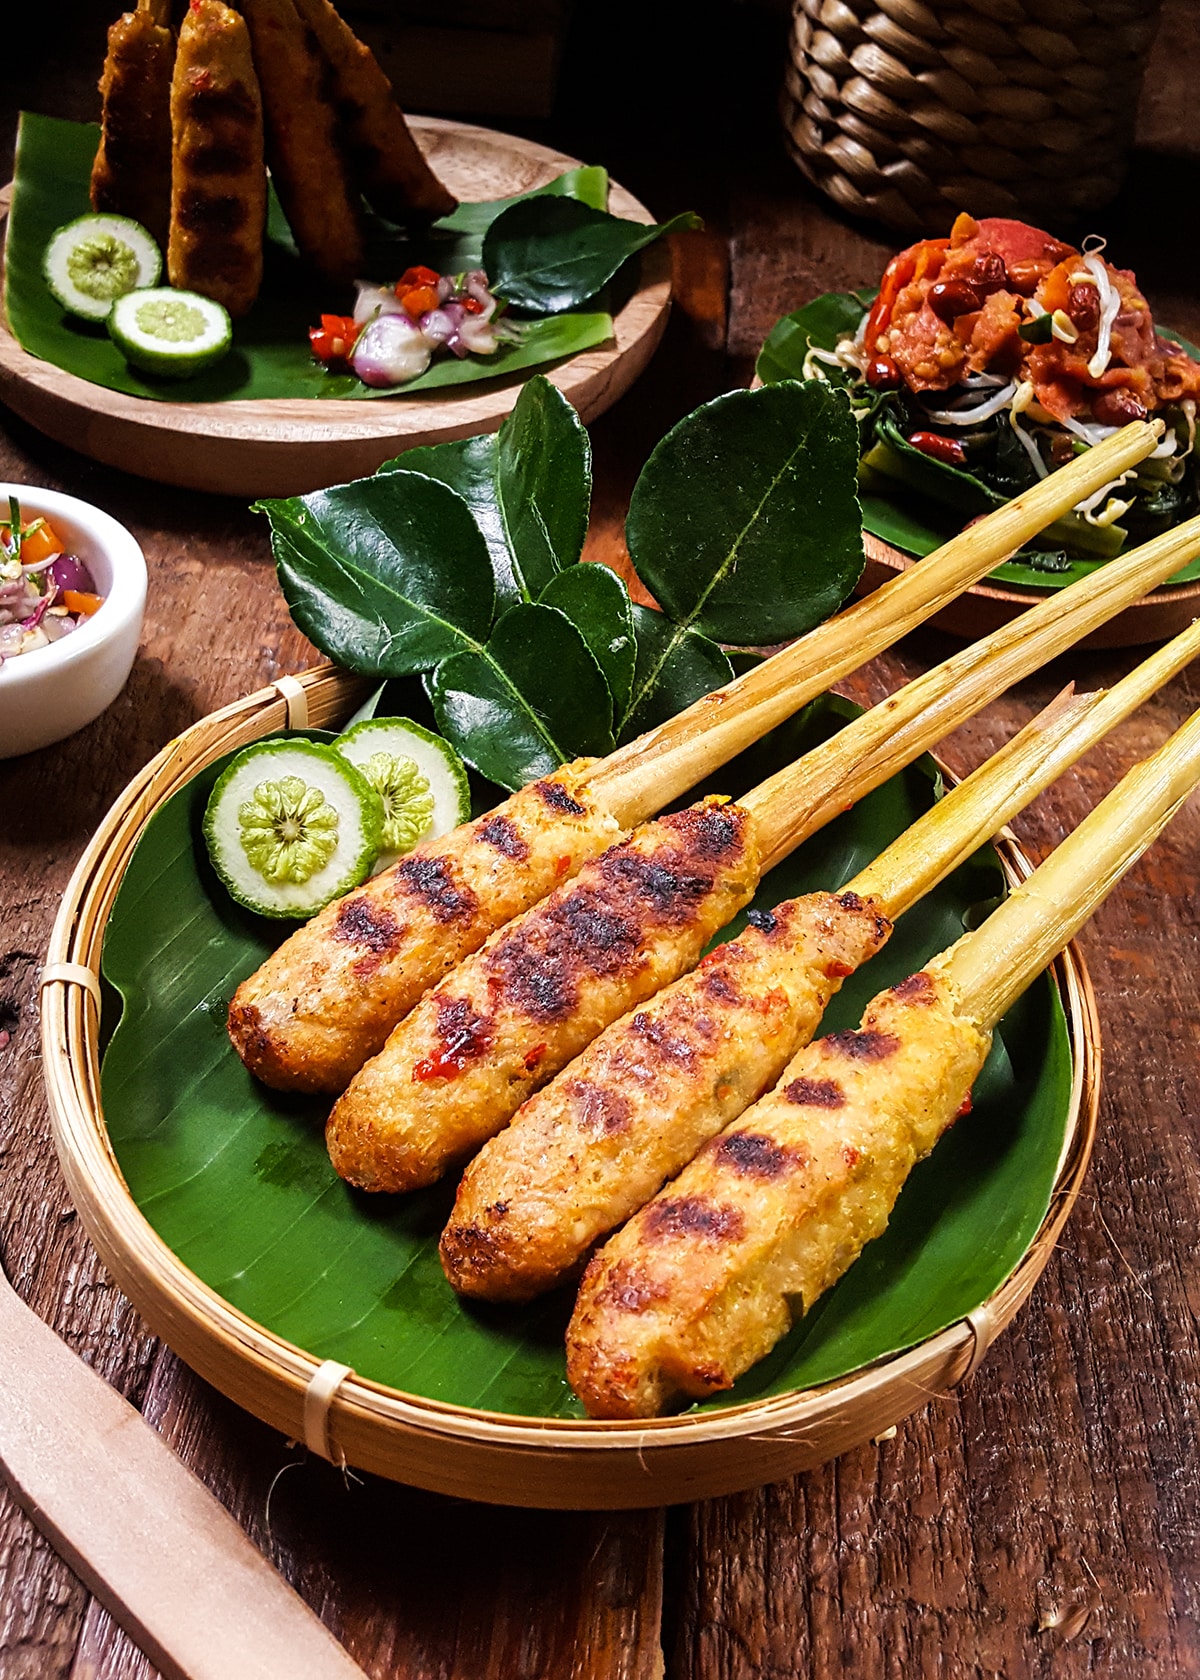 10 Iconic Cuisines That You Must Try on Your Next Visit to Bali